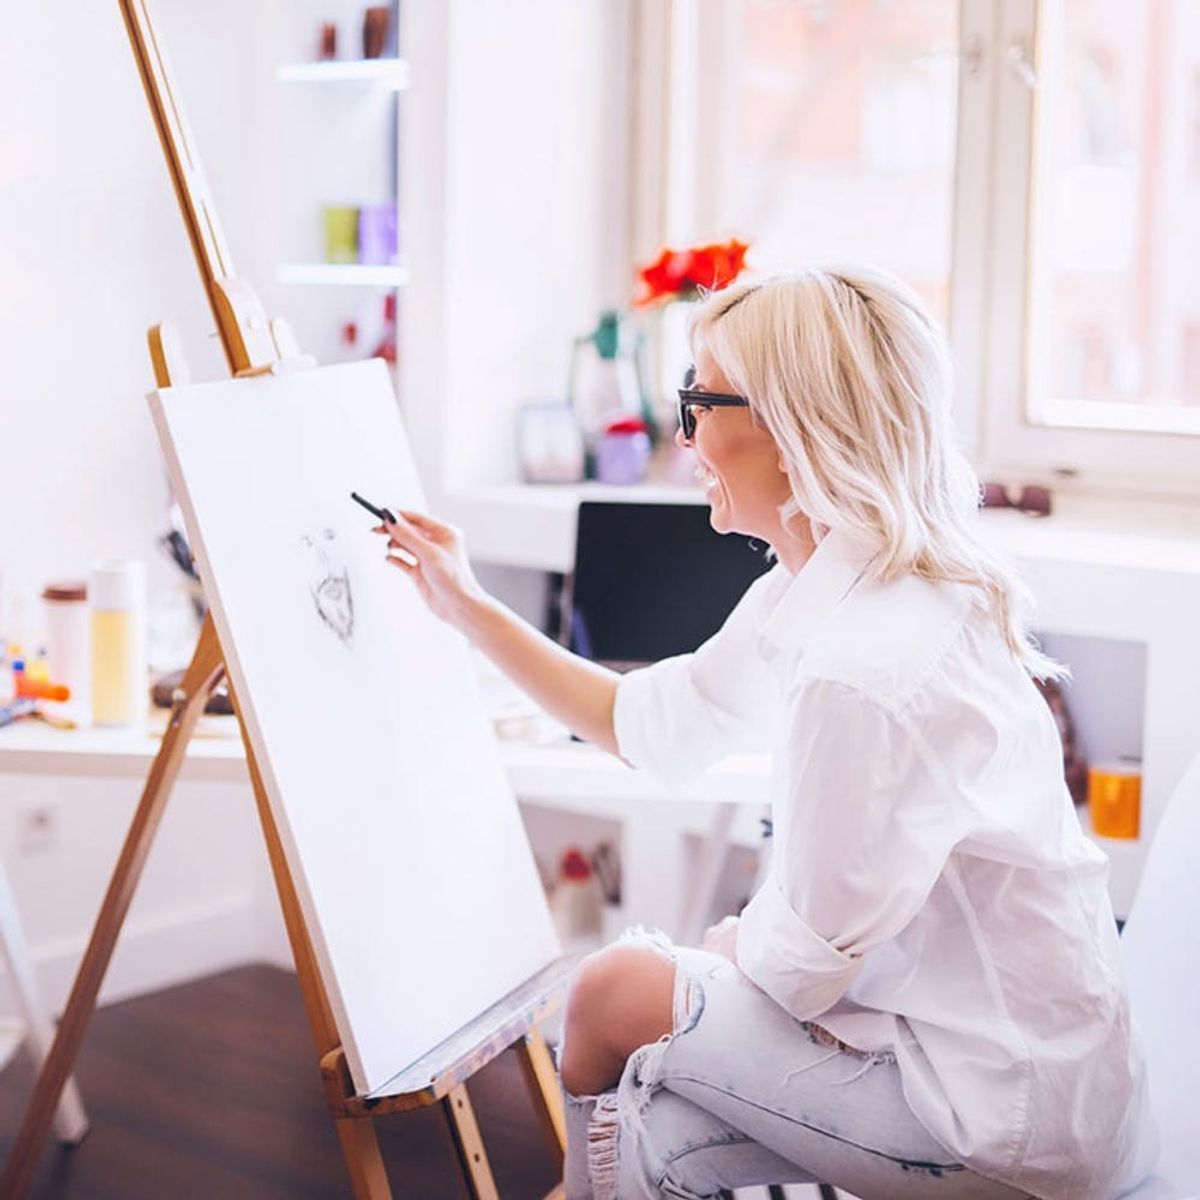 This Is When You’re Most Creative, According to Science